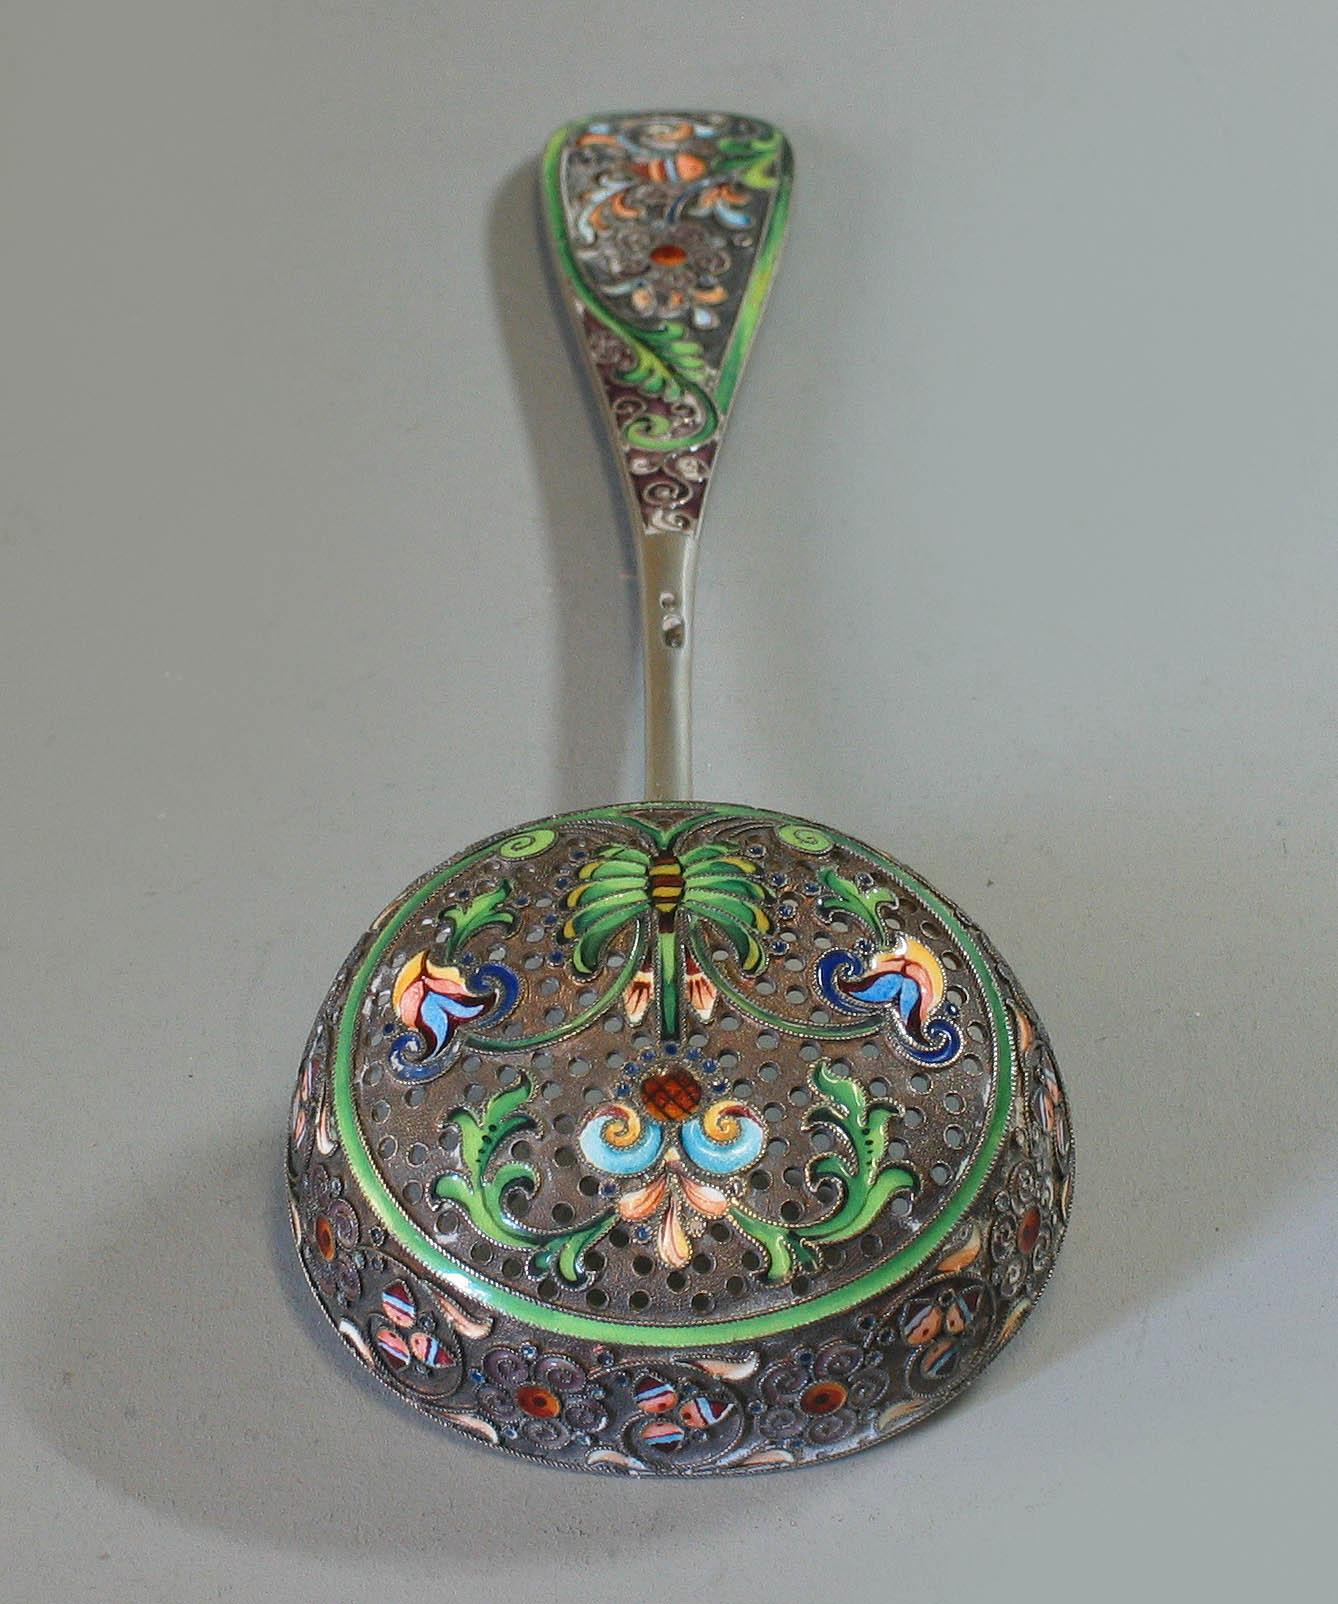 Sterling Silver Russian Silver-Gilt & Cloissone Enamel Sifter Spoon 11th Artel Moscow, 1908-1917 For Sale